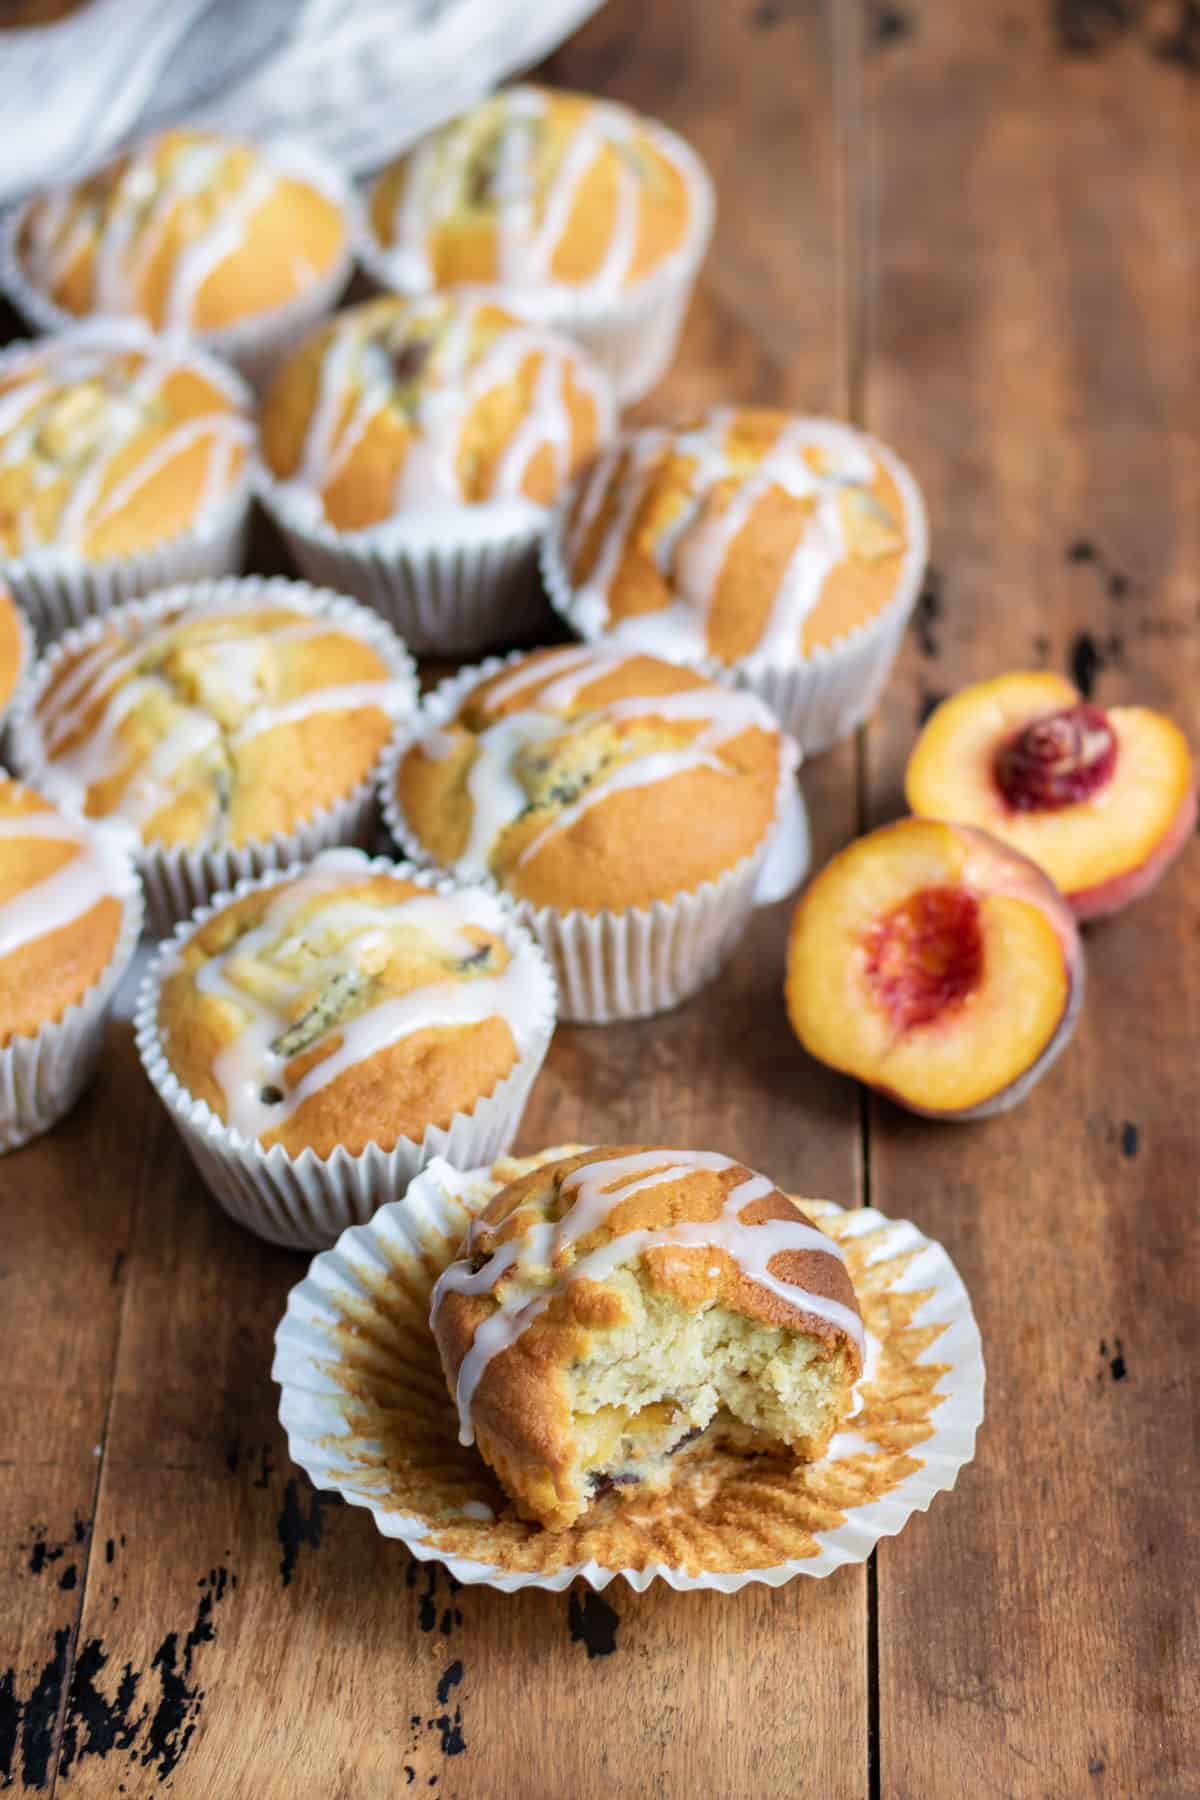 Muffins on a table next to peaches.